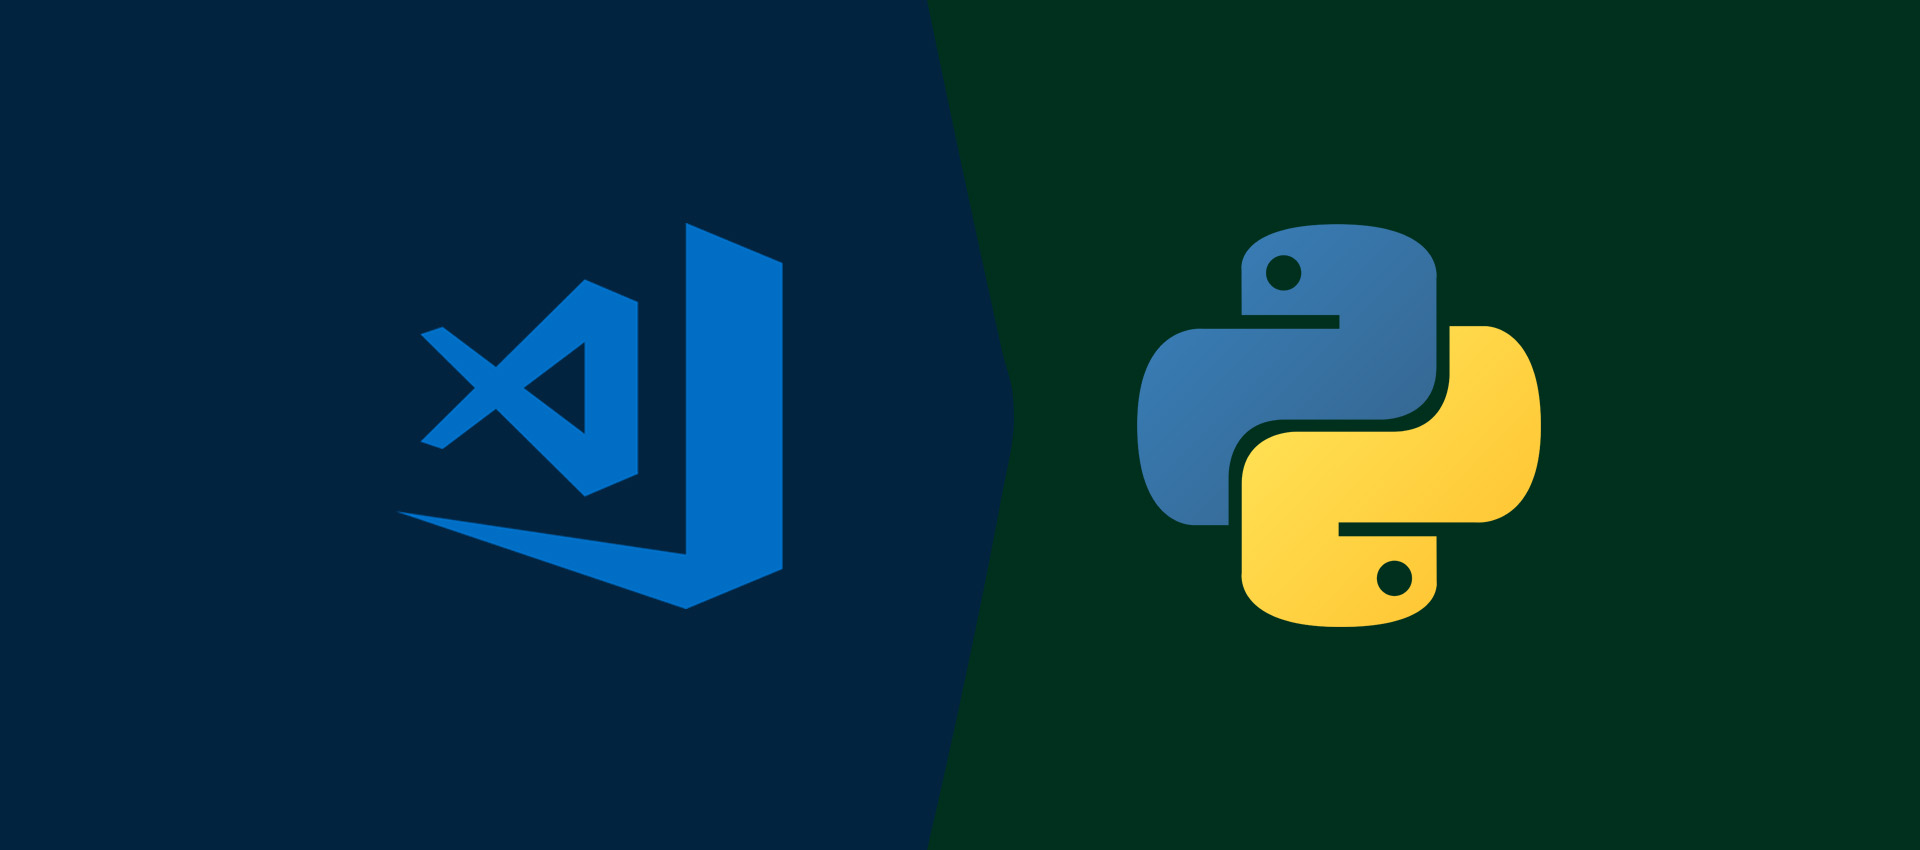 How To Install VSCode For Python On Ubuntu